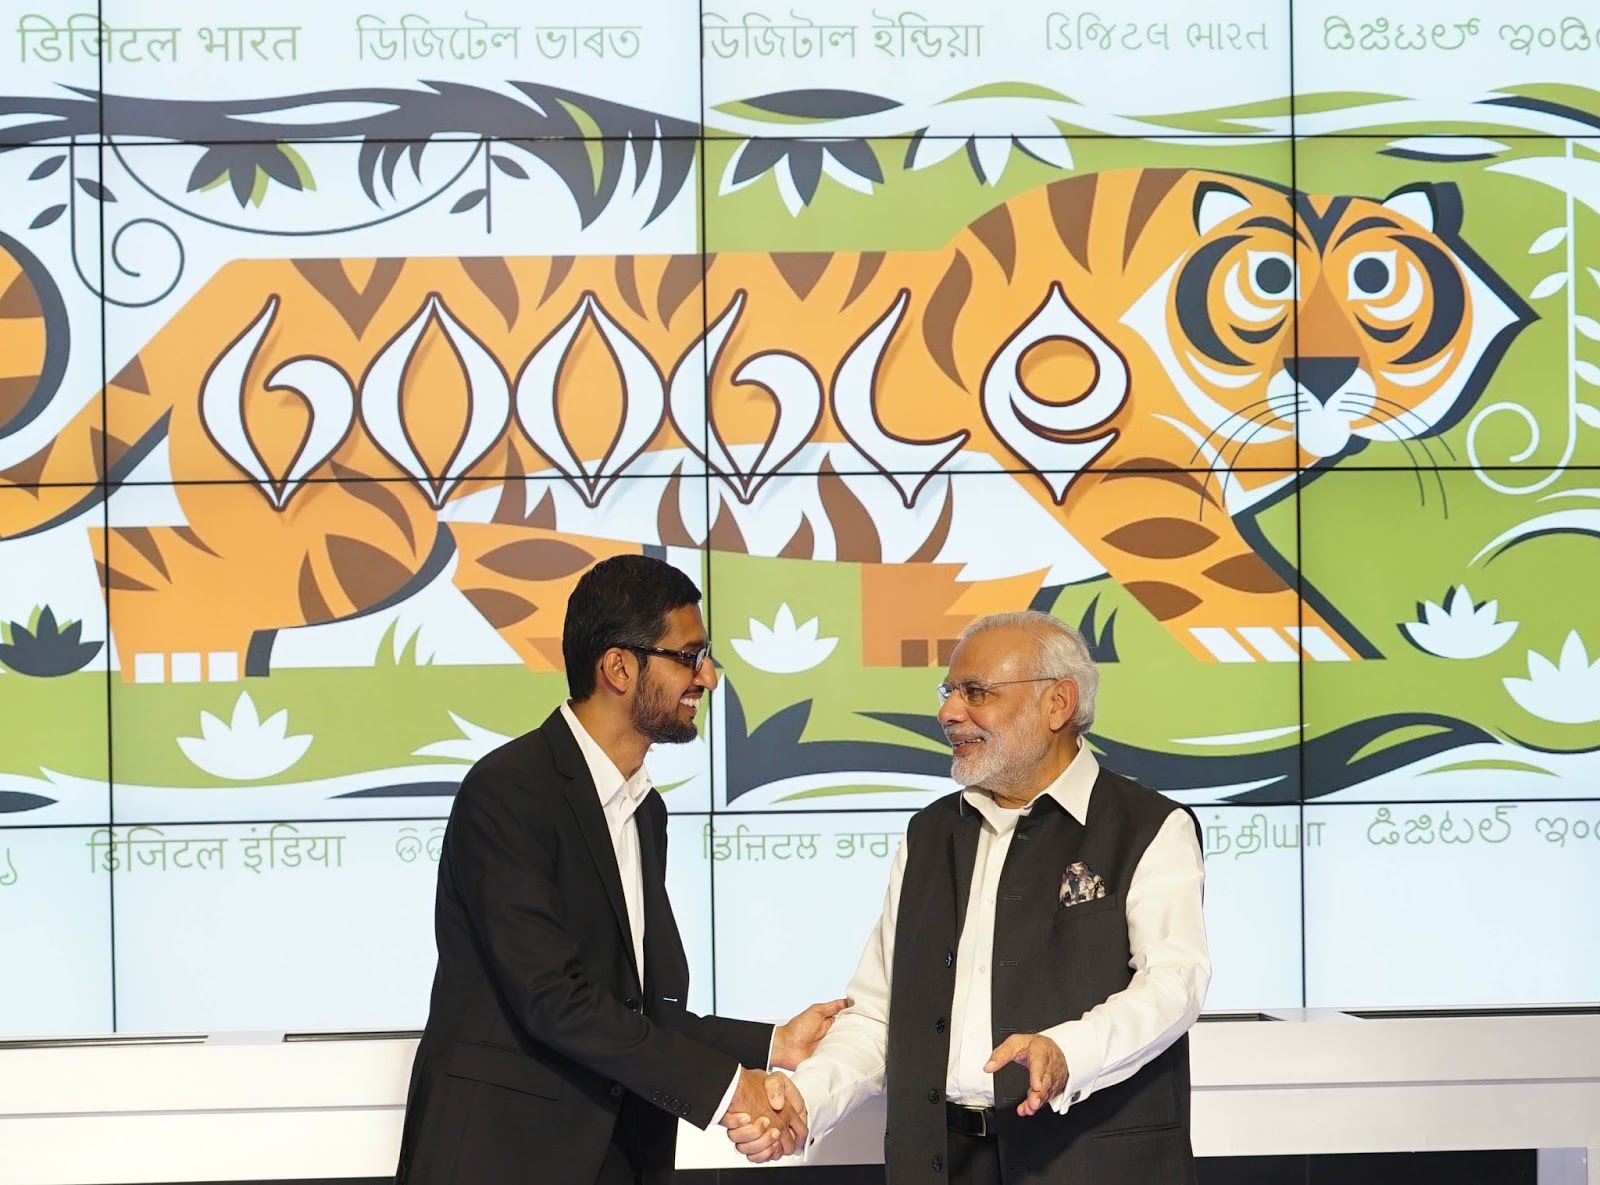 Google Is Bringing Free, High-Speed Wi-Fi Internet To India’s Train Stations